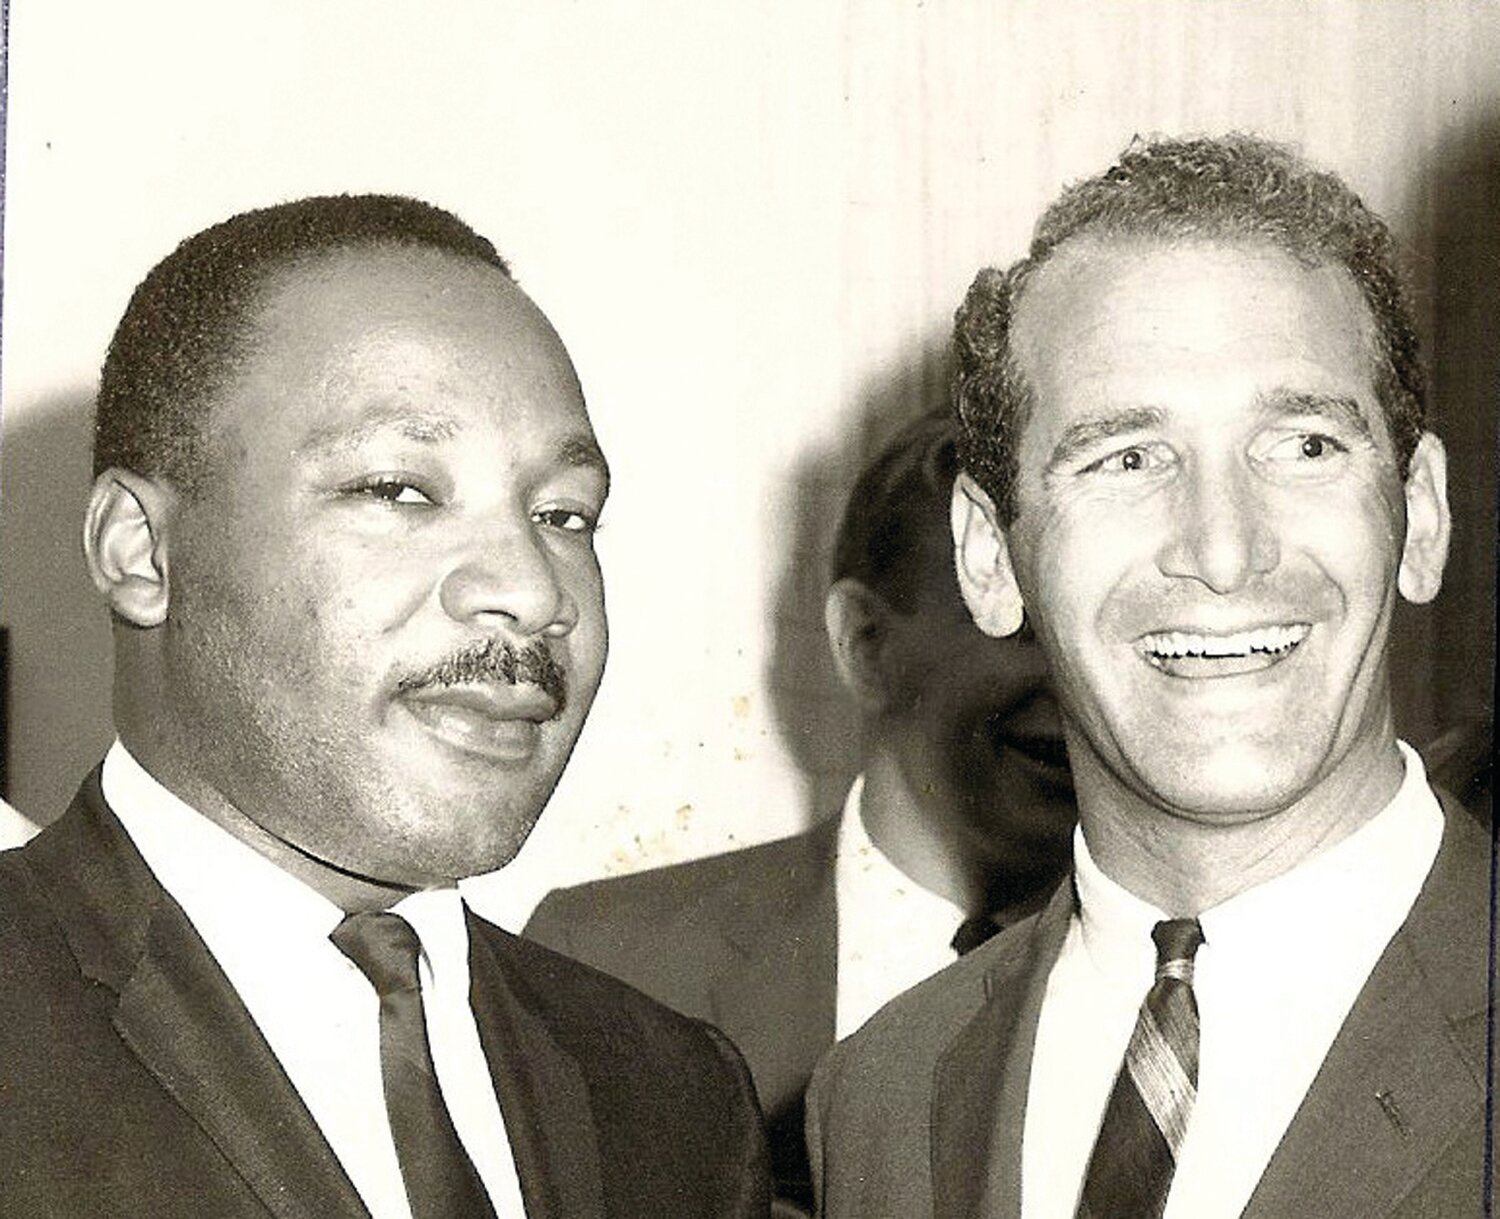 Norval Reece, right, with Martin Luther King Jr. in early 1968.